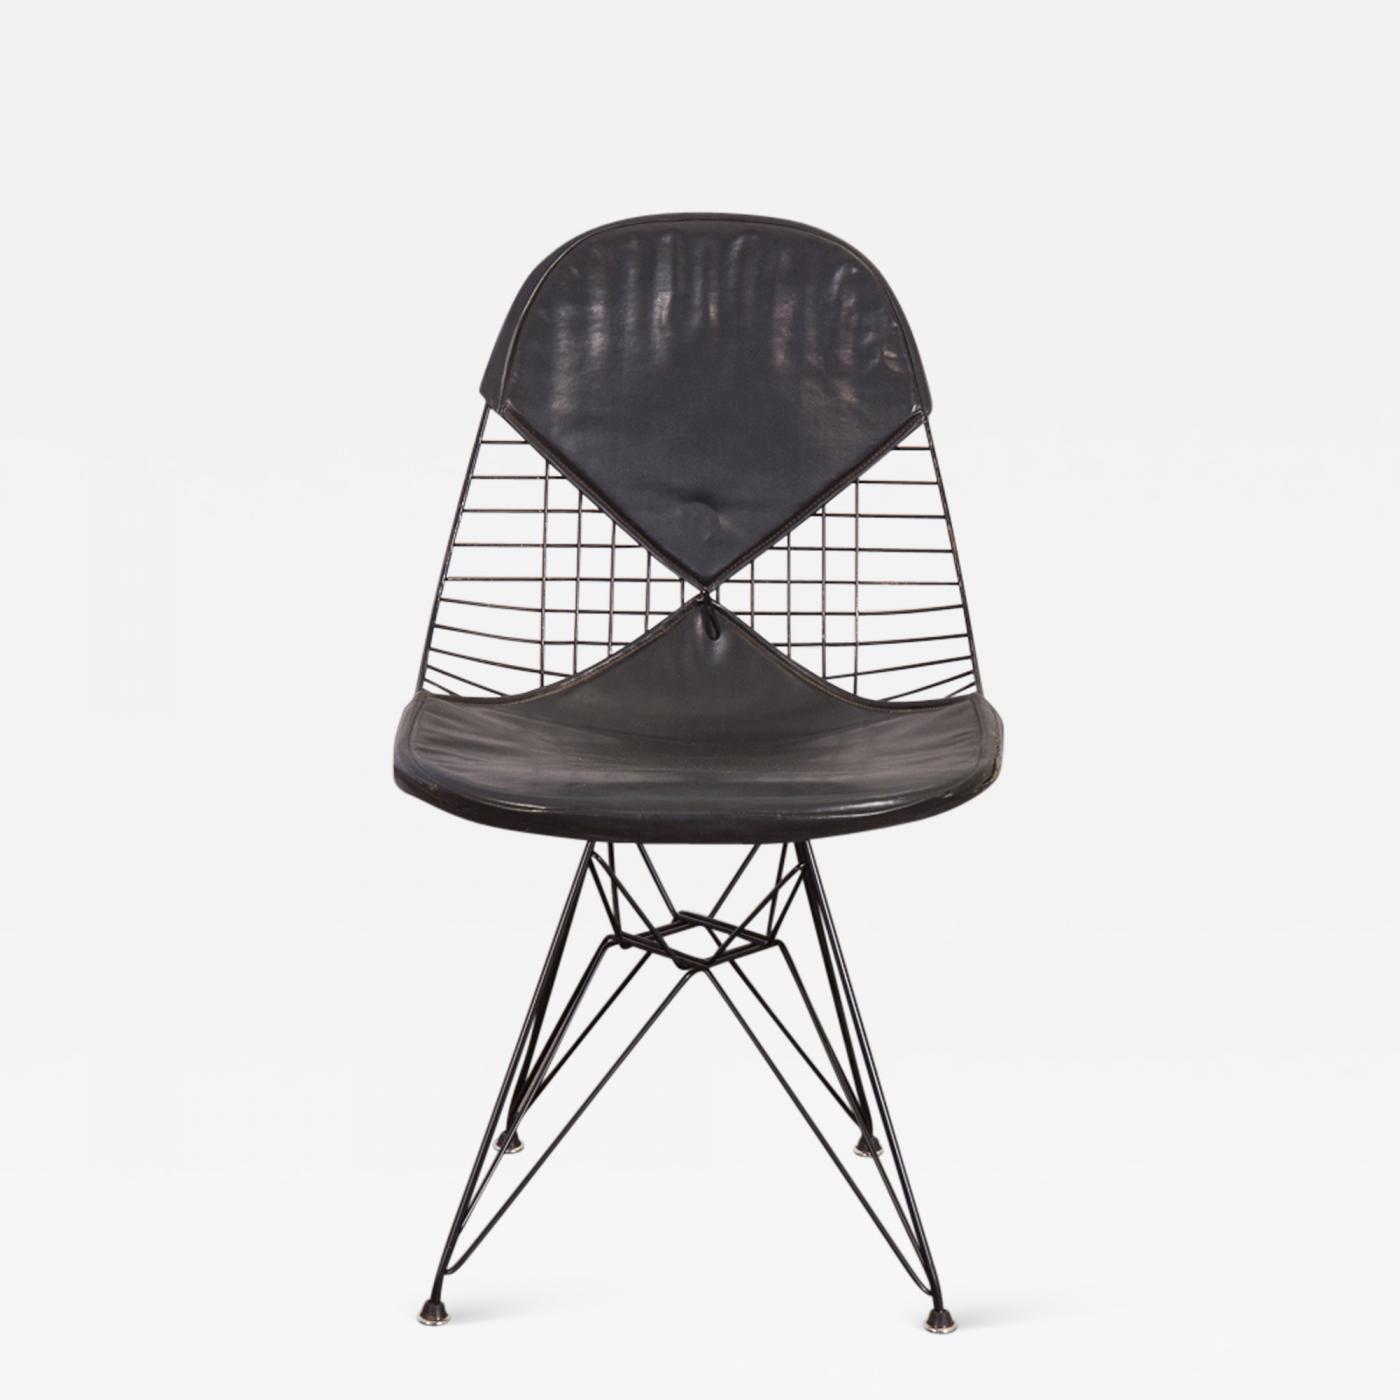 Herman Miller Black Eames Wire Chair With Bikini Cover On Eiffel